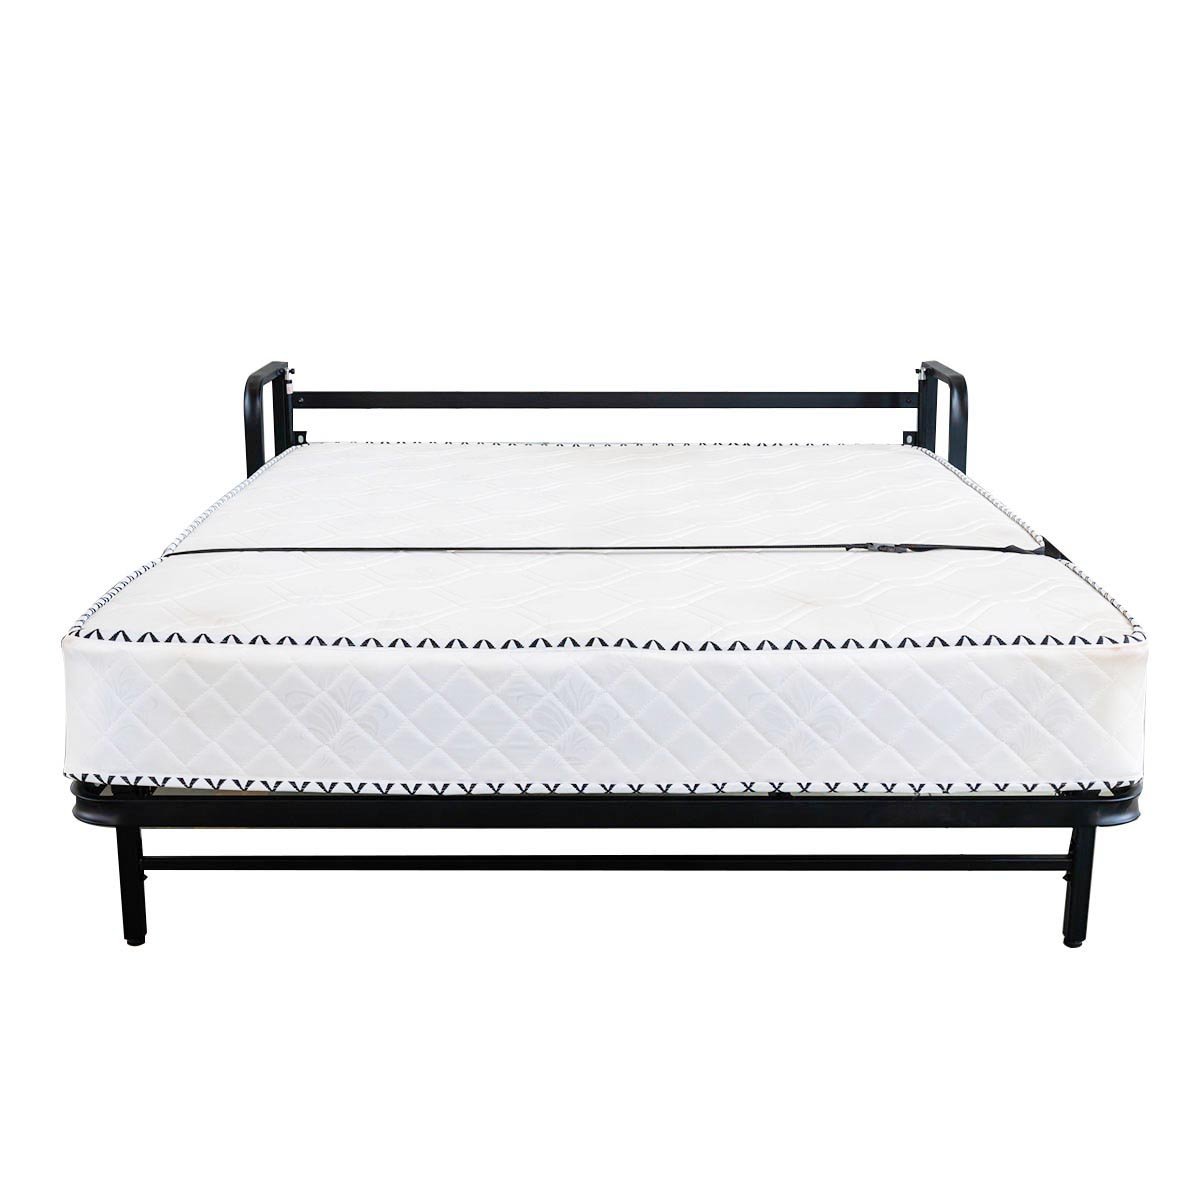 Pull-Out Bed kit supplier